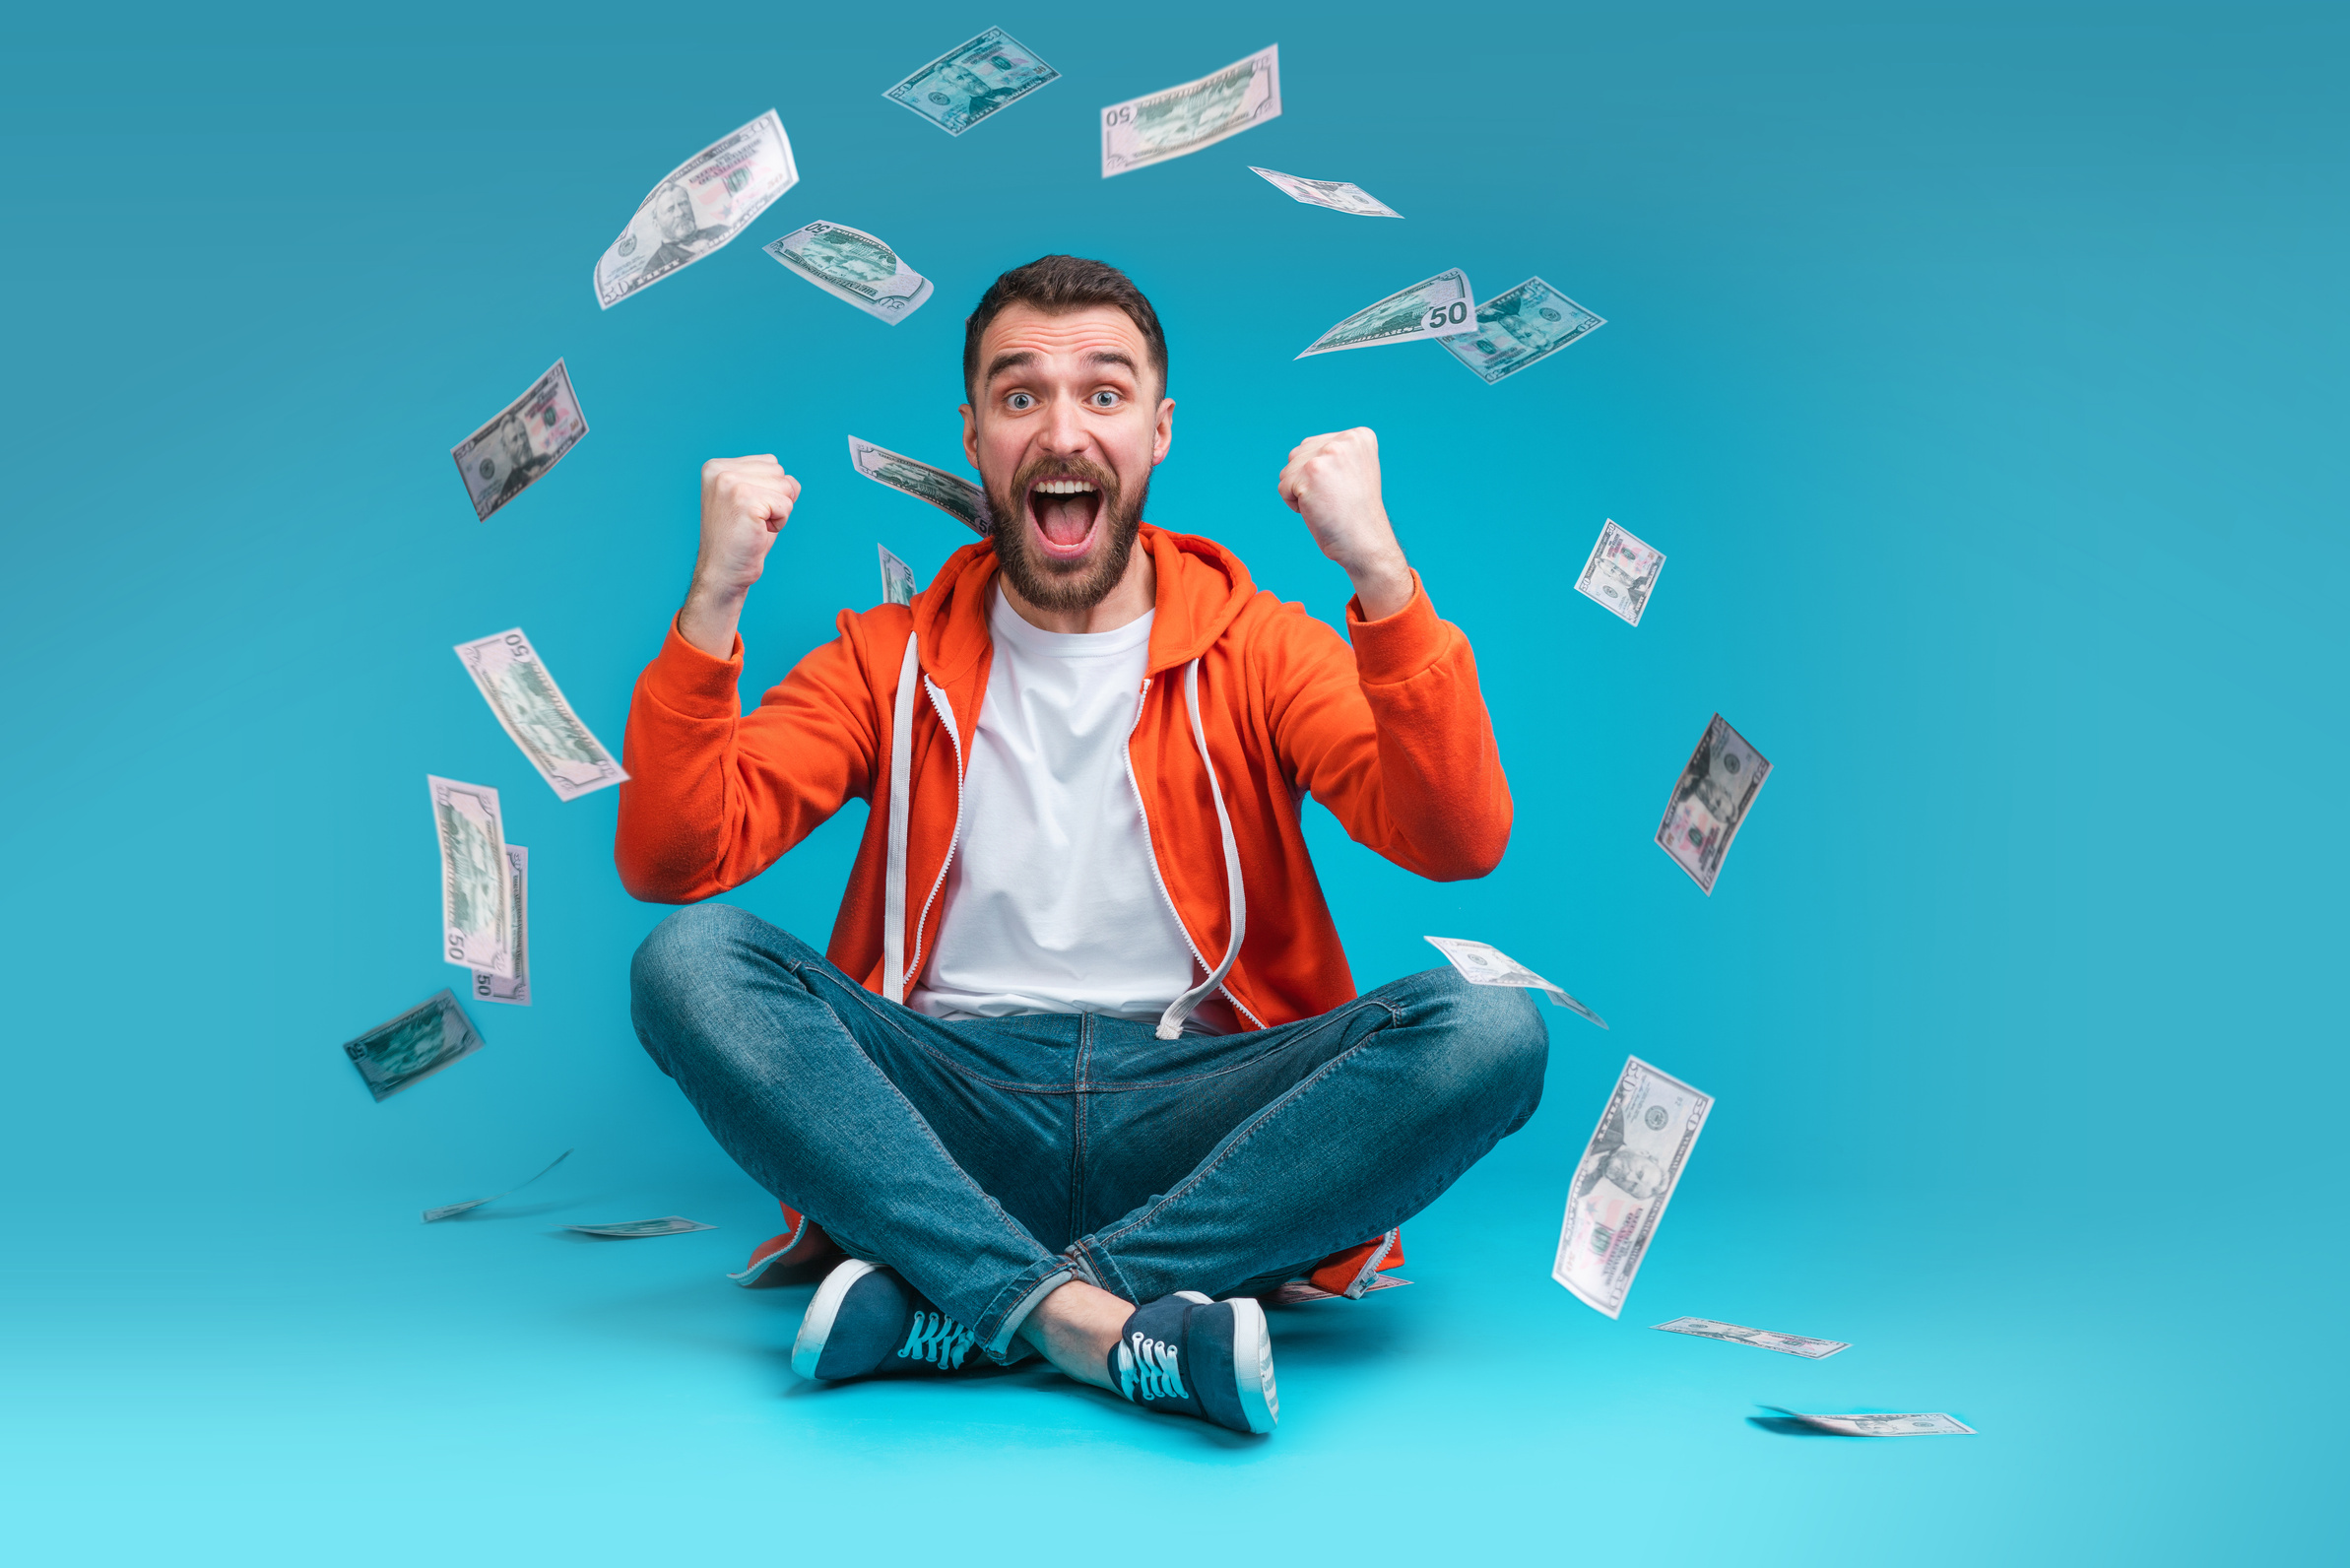 Lucky man celebrating money win after betting online at bookmaker's website